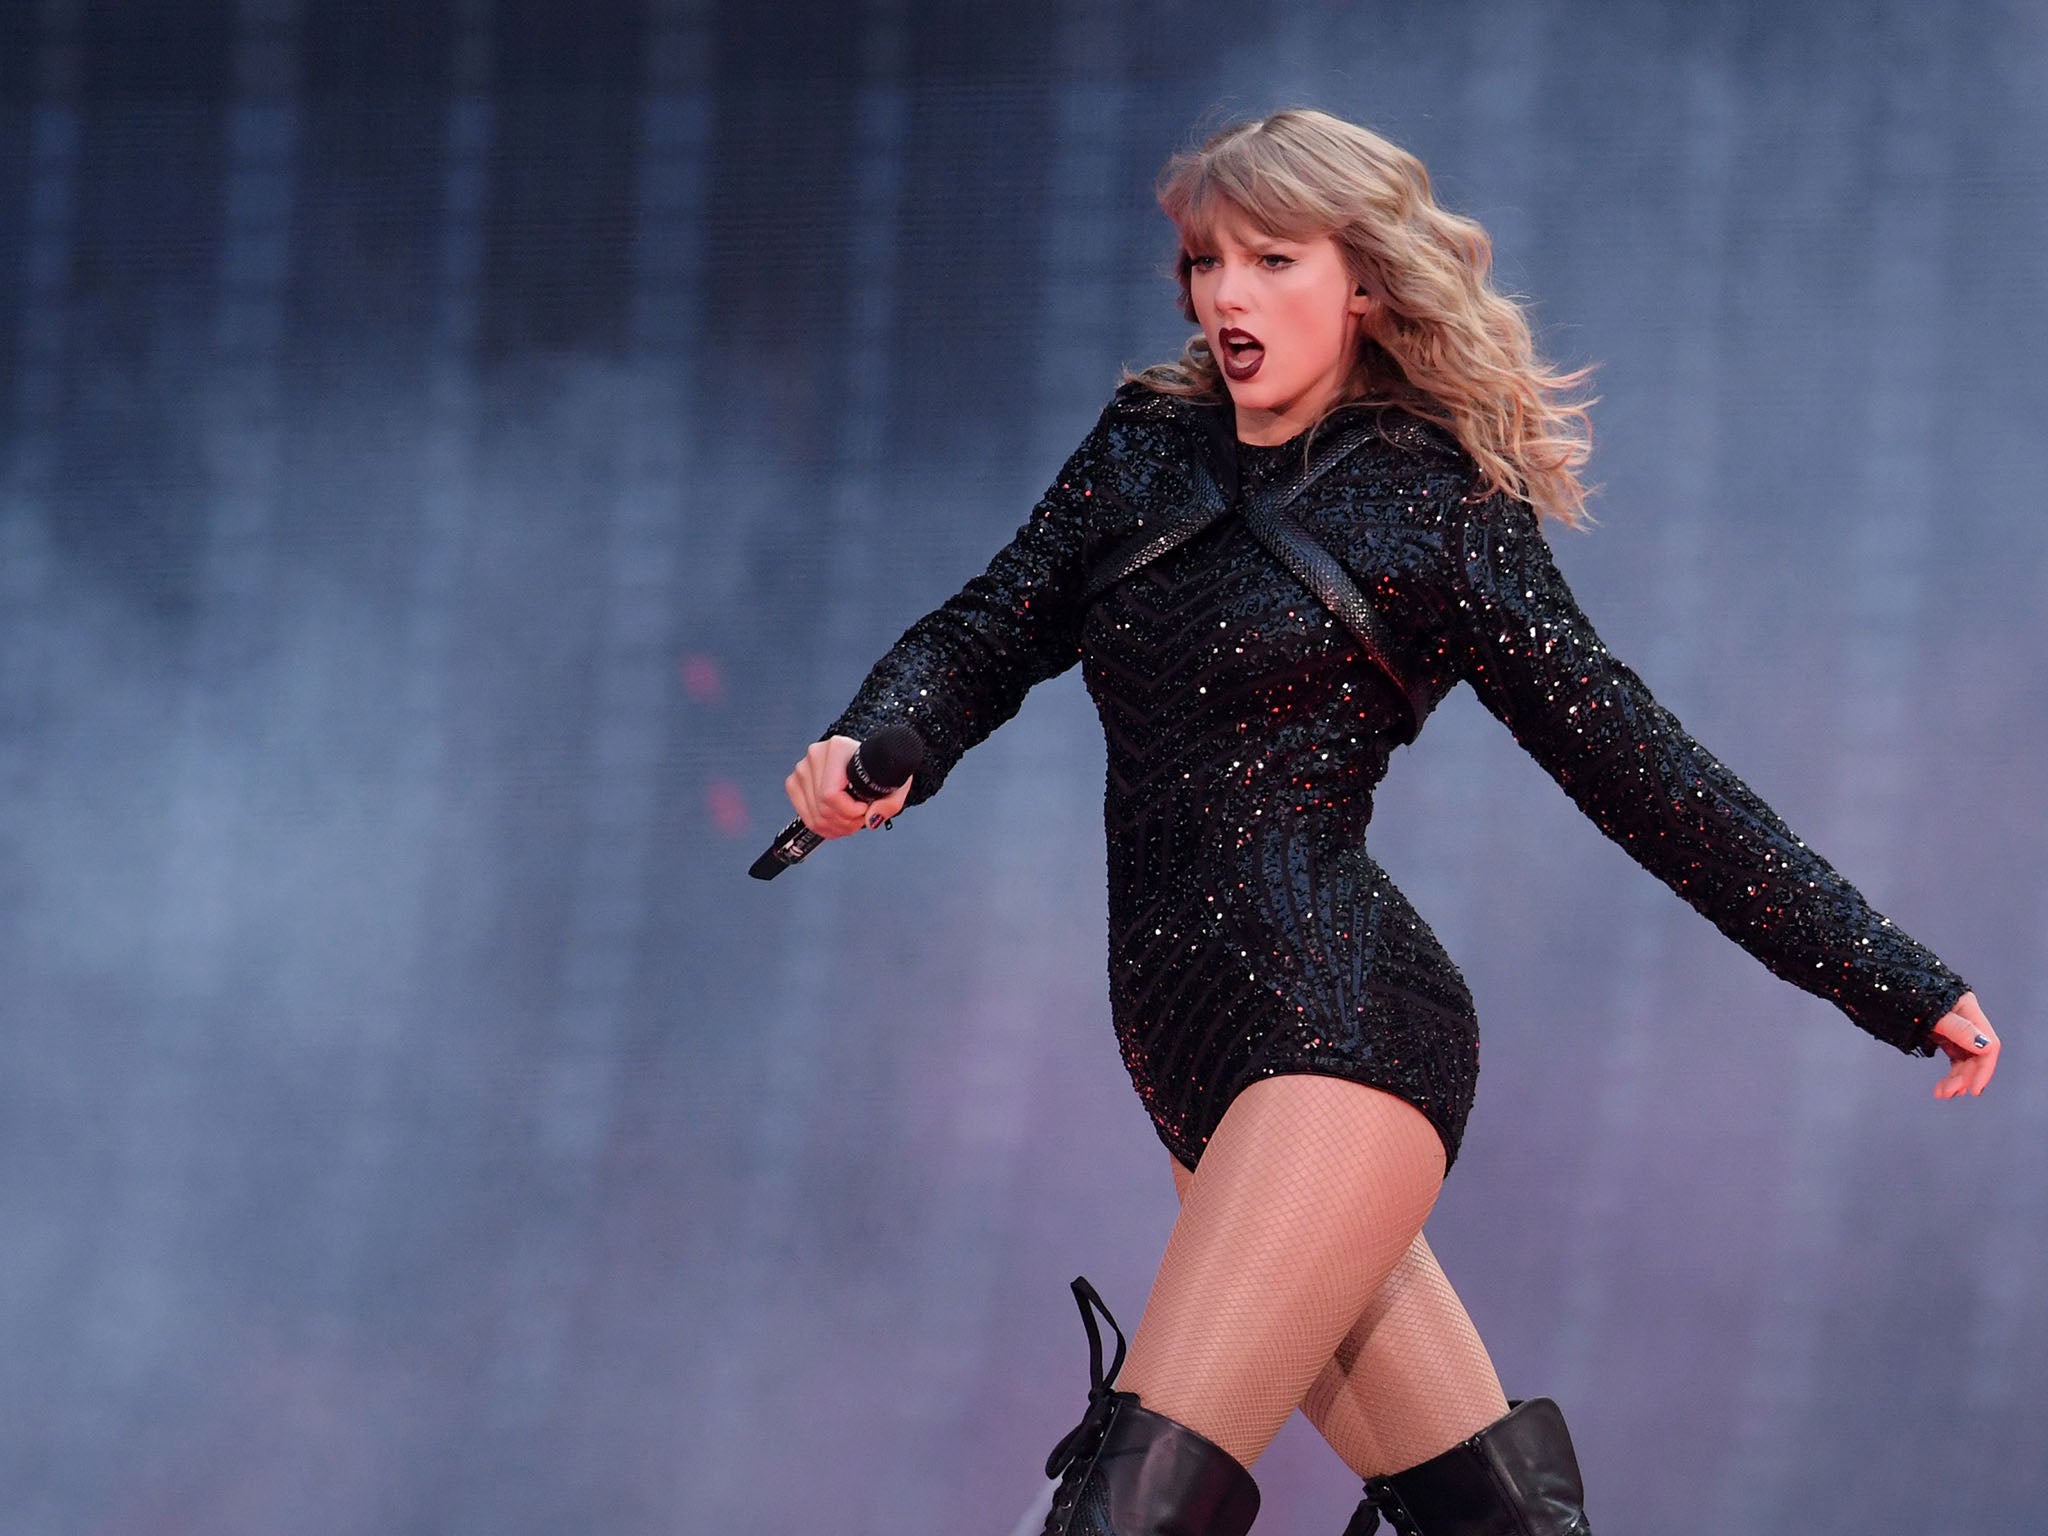 Can a Metallica-loving dad really appreciate a Taylor Swift mega show? | The Independent2048 x 1536